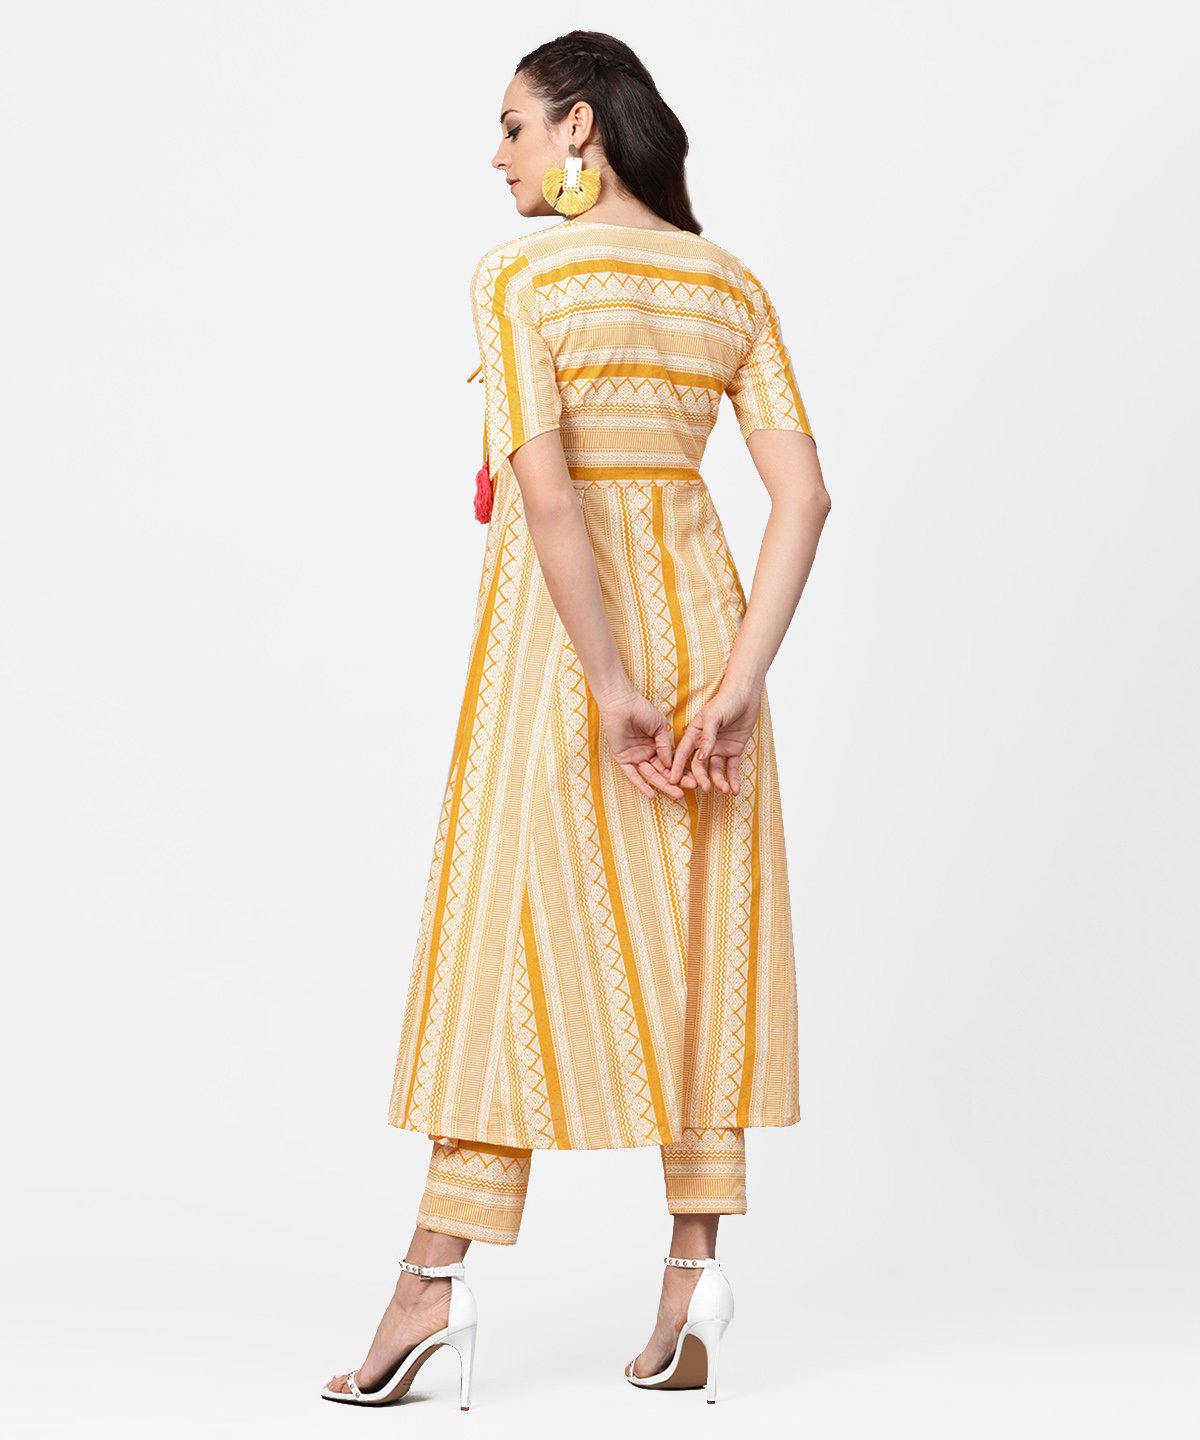 Women's Yellow Printed Half Slevee Cotton A-Line Kurta With Dori Work With Ankle Length Pant - Nayo Clothing